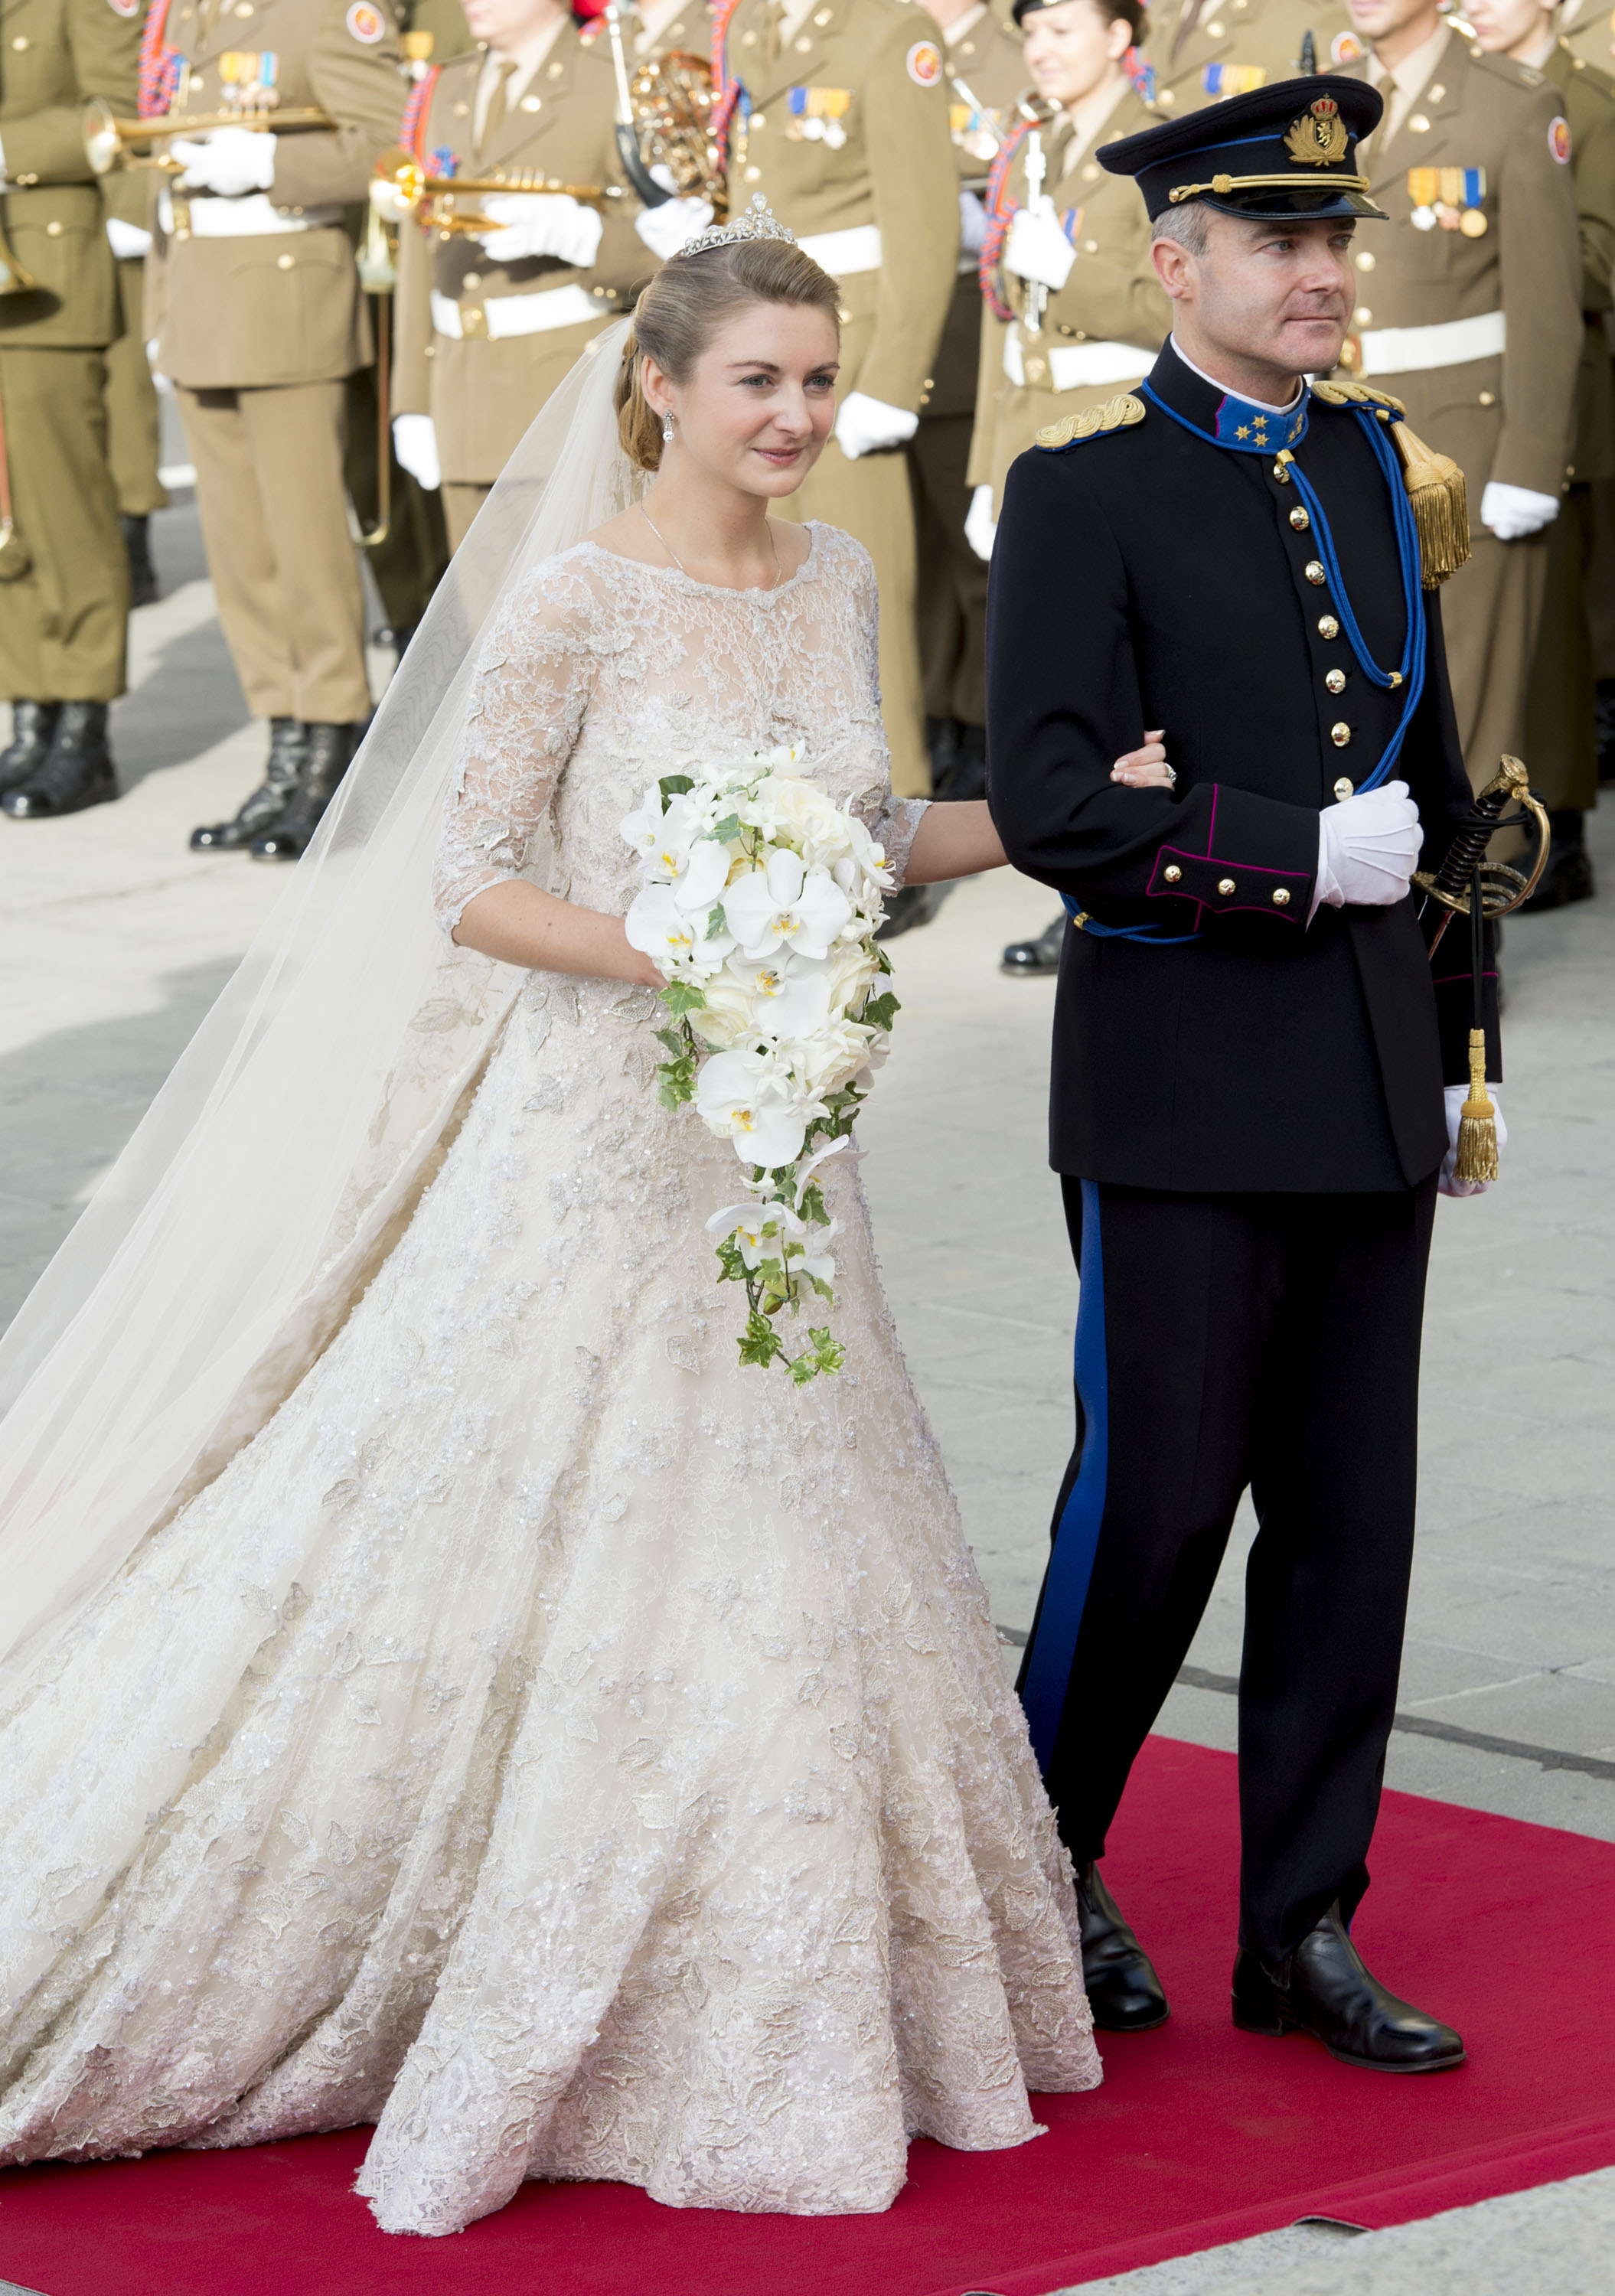 The Wedding Of Prince Guillaume Of Luxembourg &amp; Stephanie de Lannoy - Official Ceremony